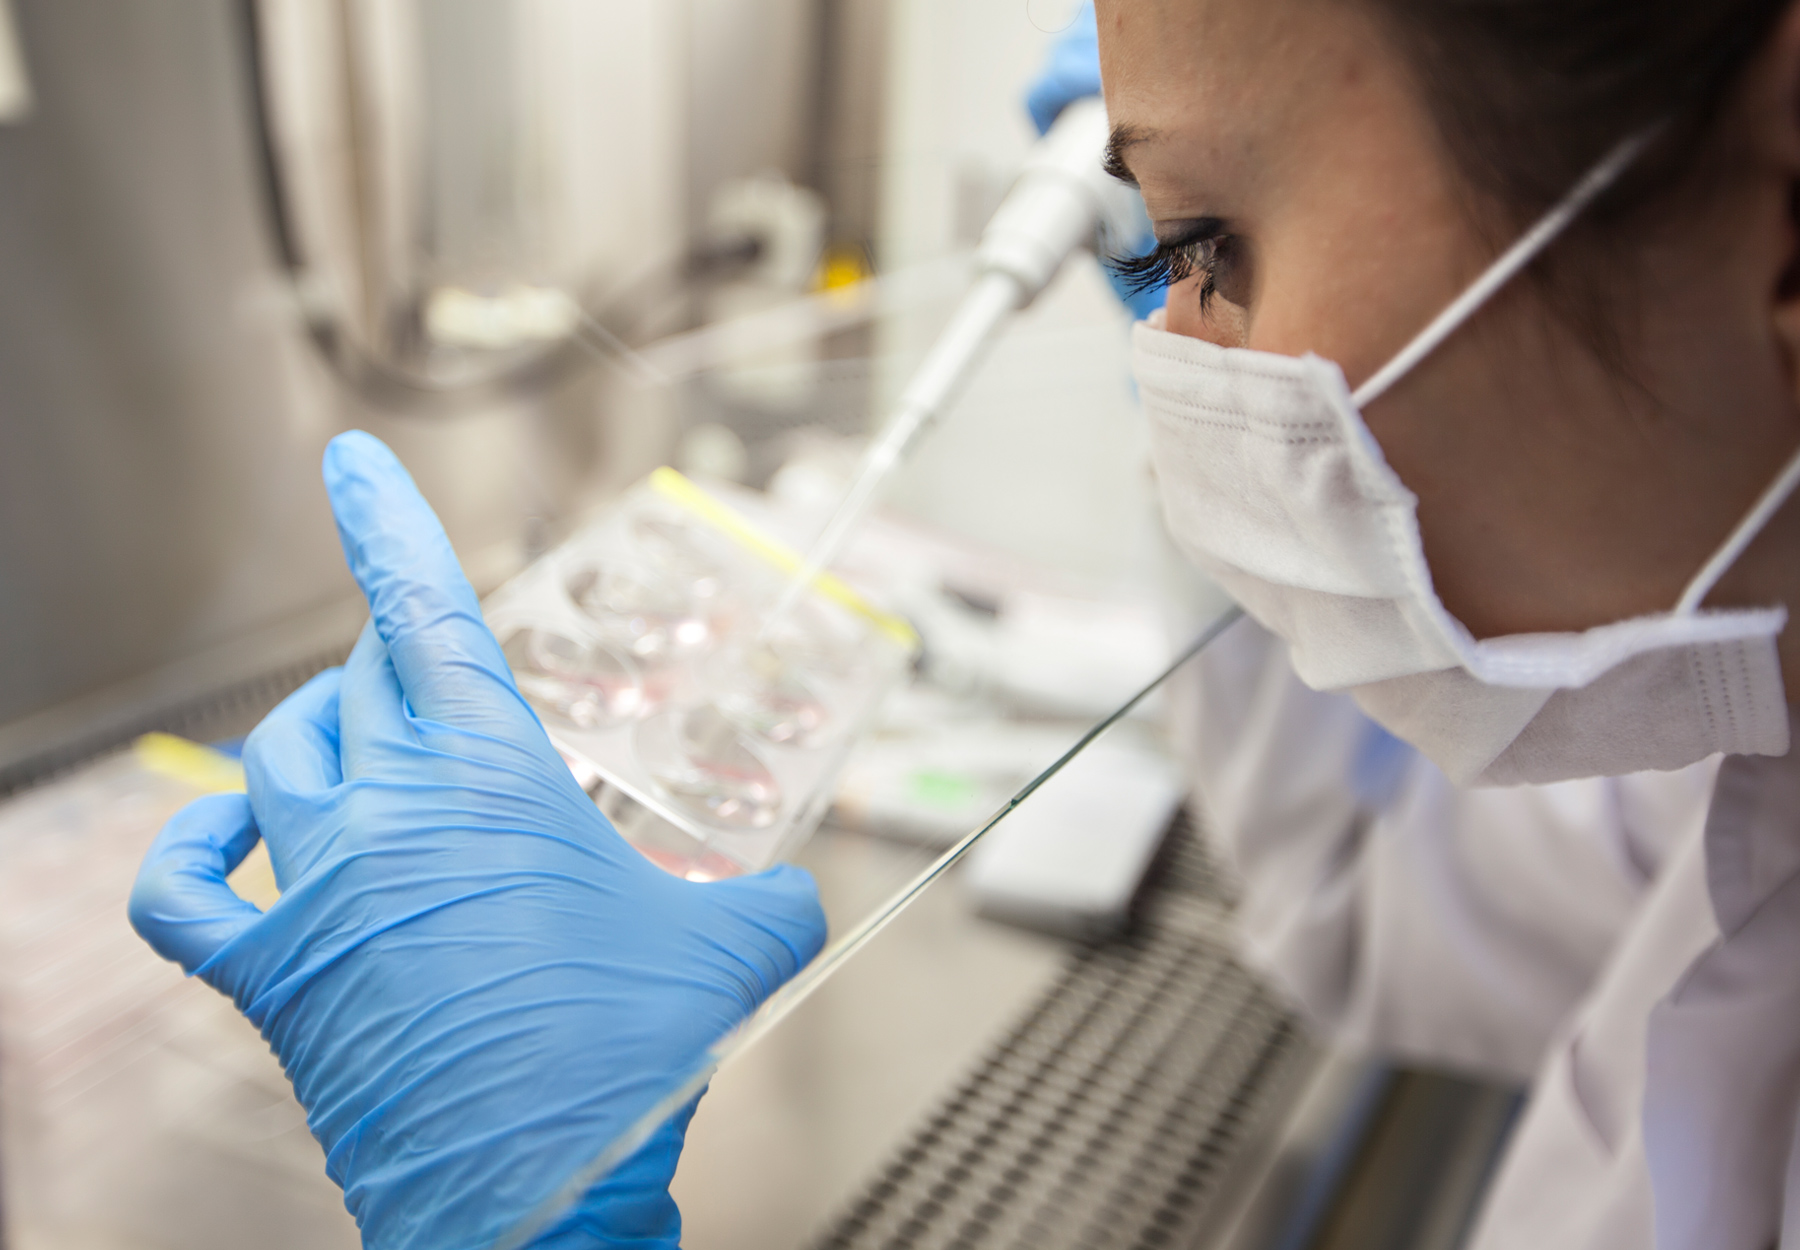 Researcher working with pipette at fume hood in the lab. iStock image.